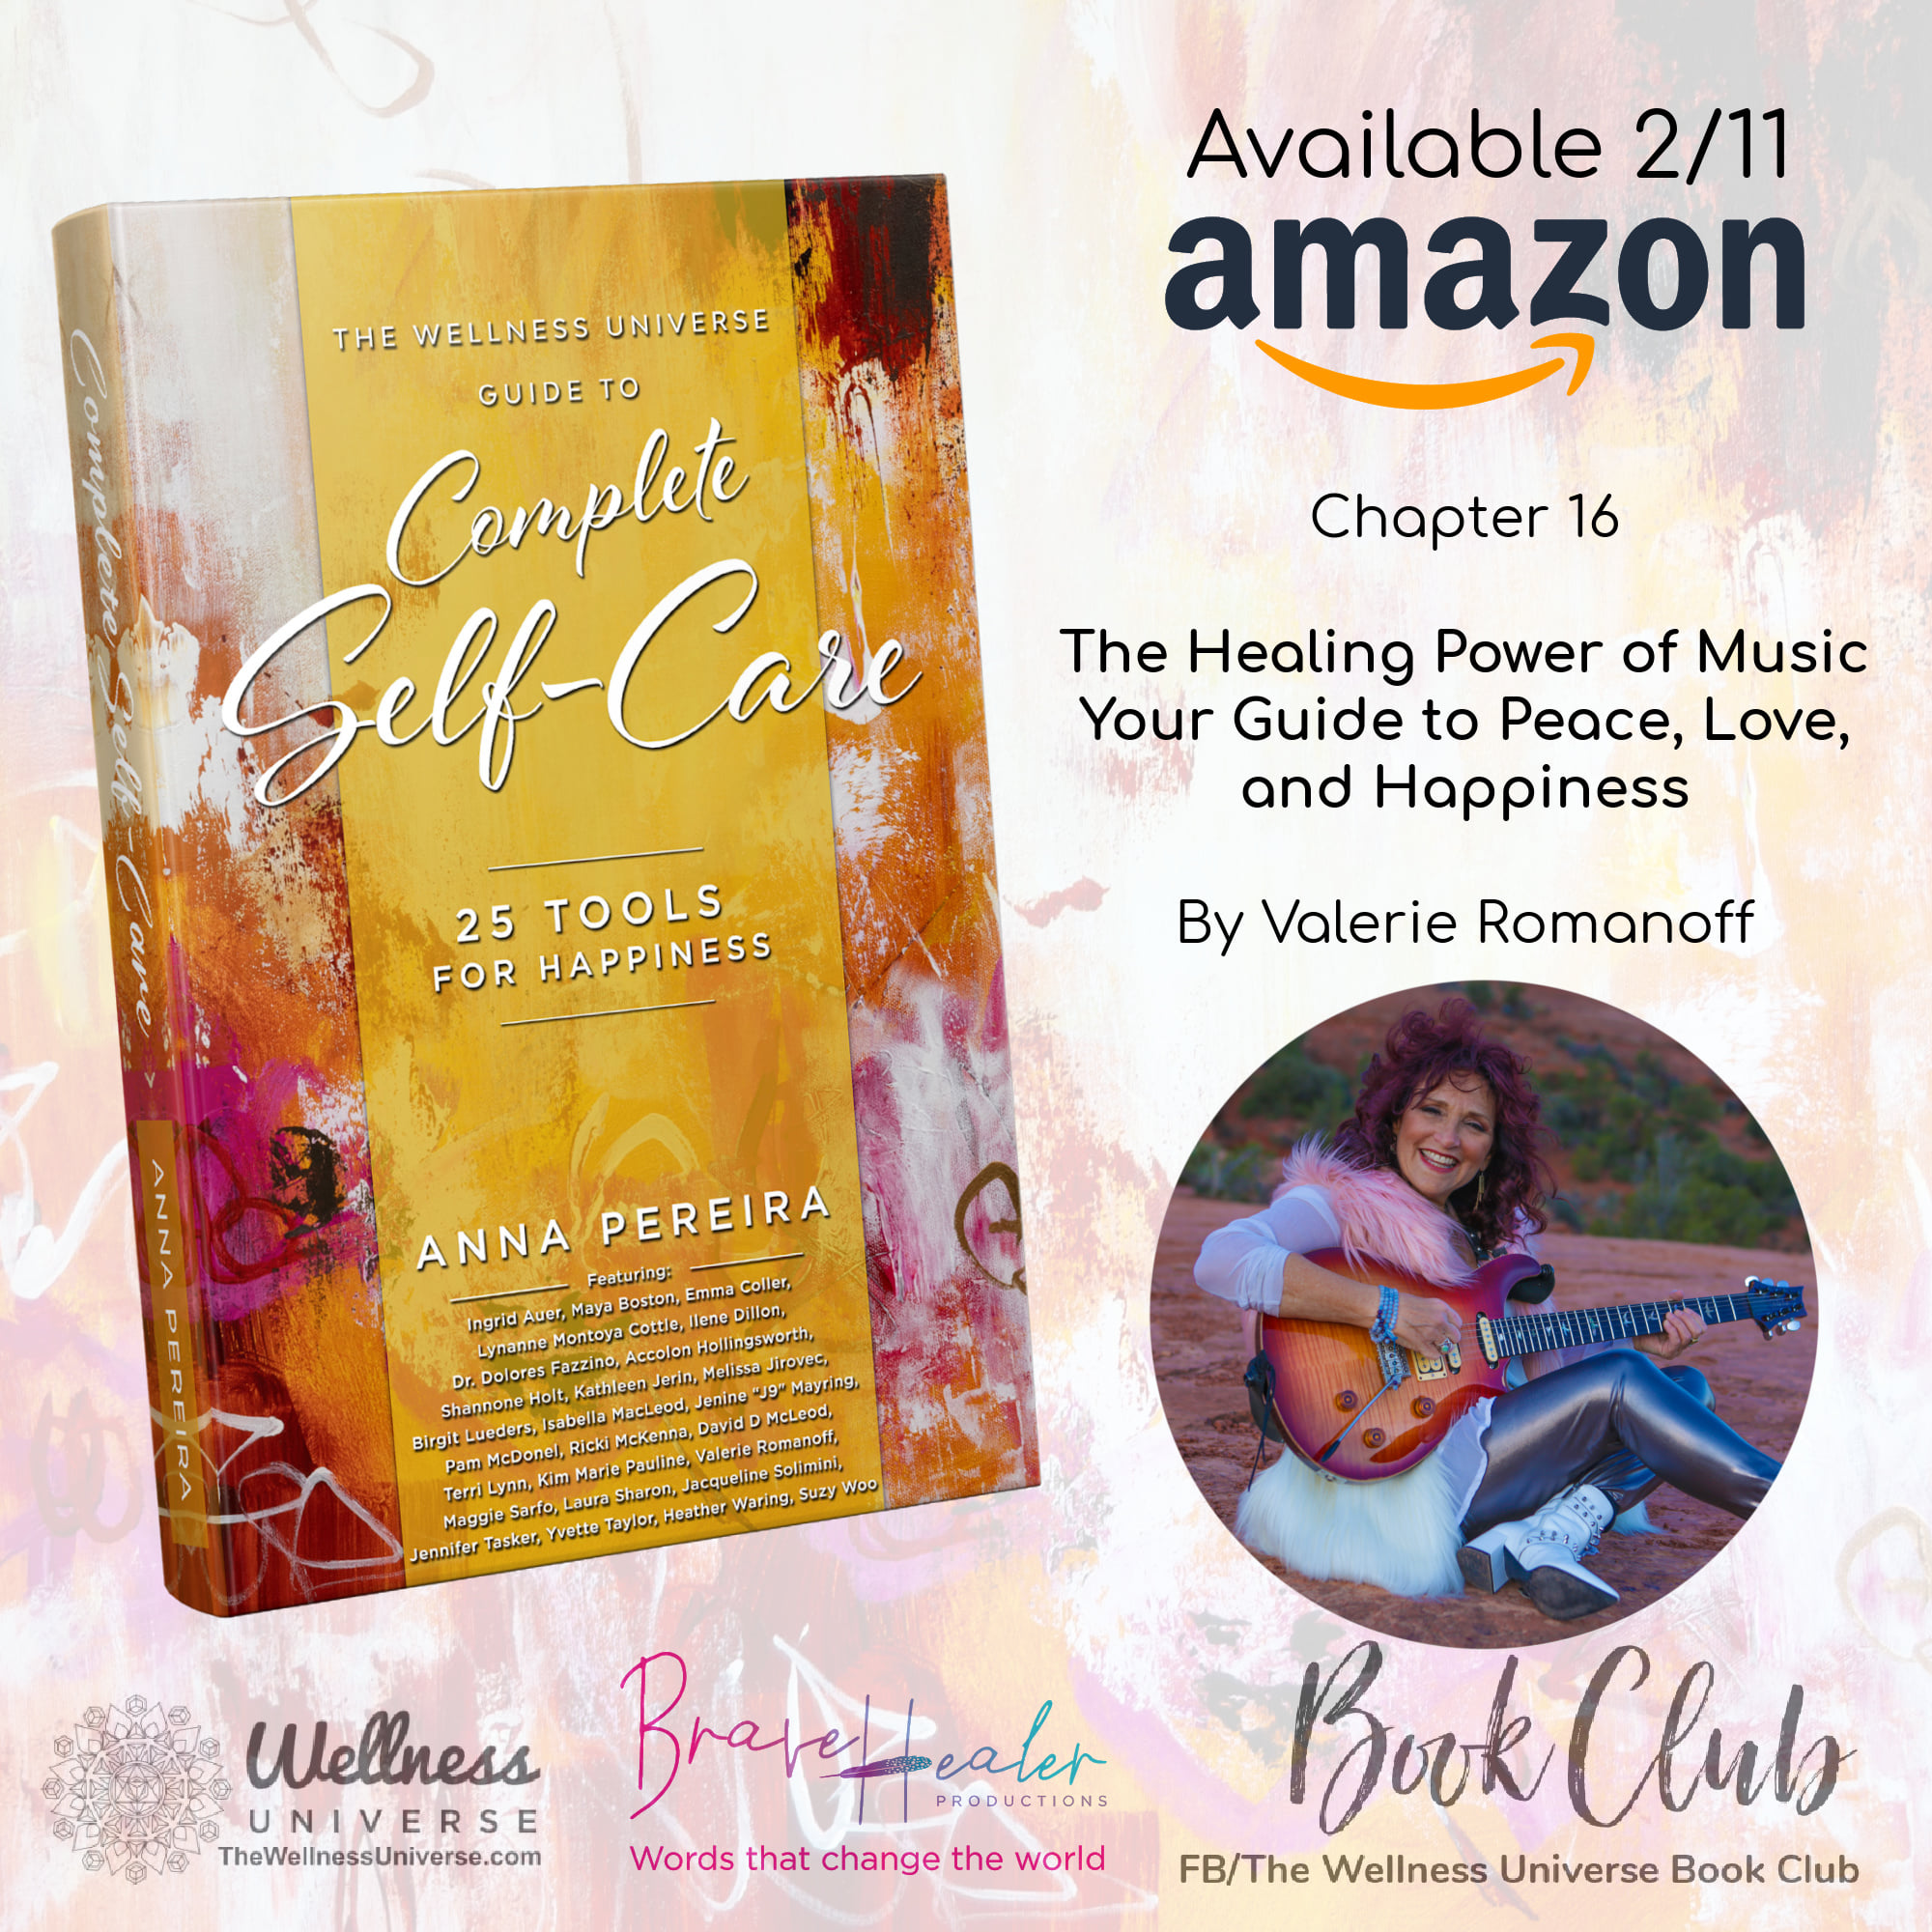 The Healing Power of Music- “Your Guide to Peace, Love & Happiness,” Chapter 16 by Valerie Romanoff